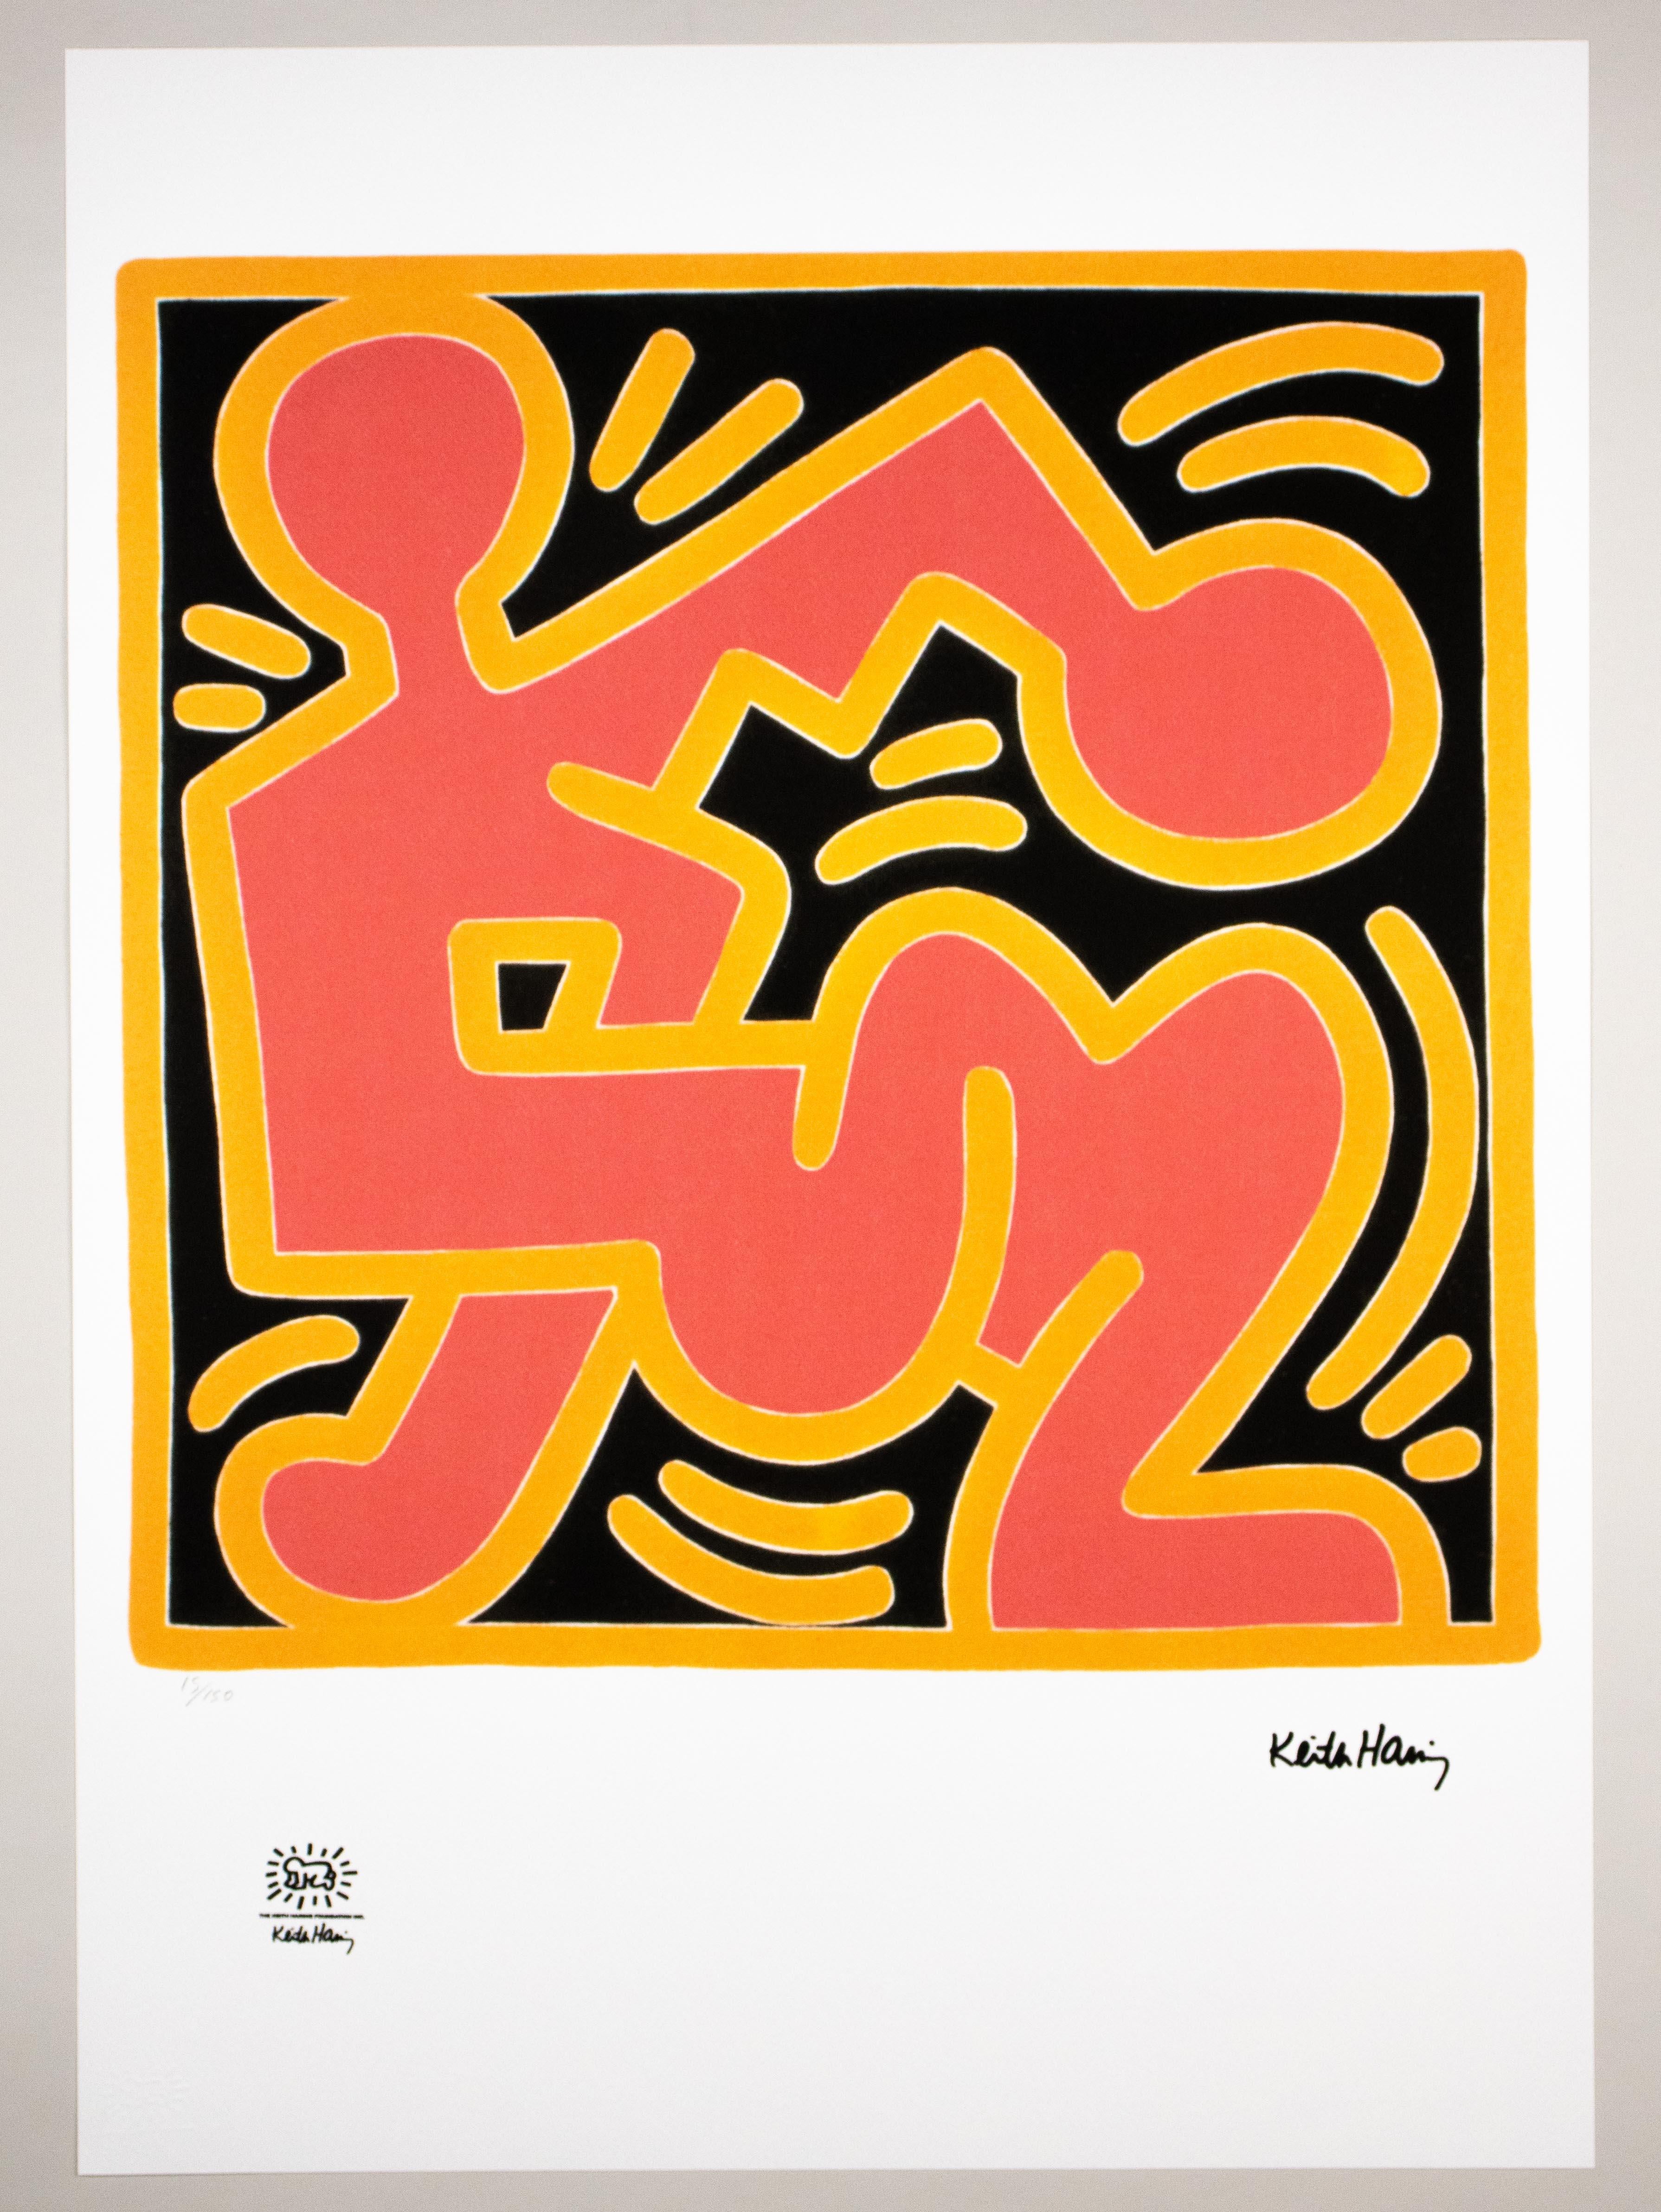 Lithograph - Limited Edition 15/150 - Keith Haring Foundation Inc. 1